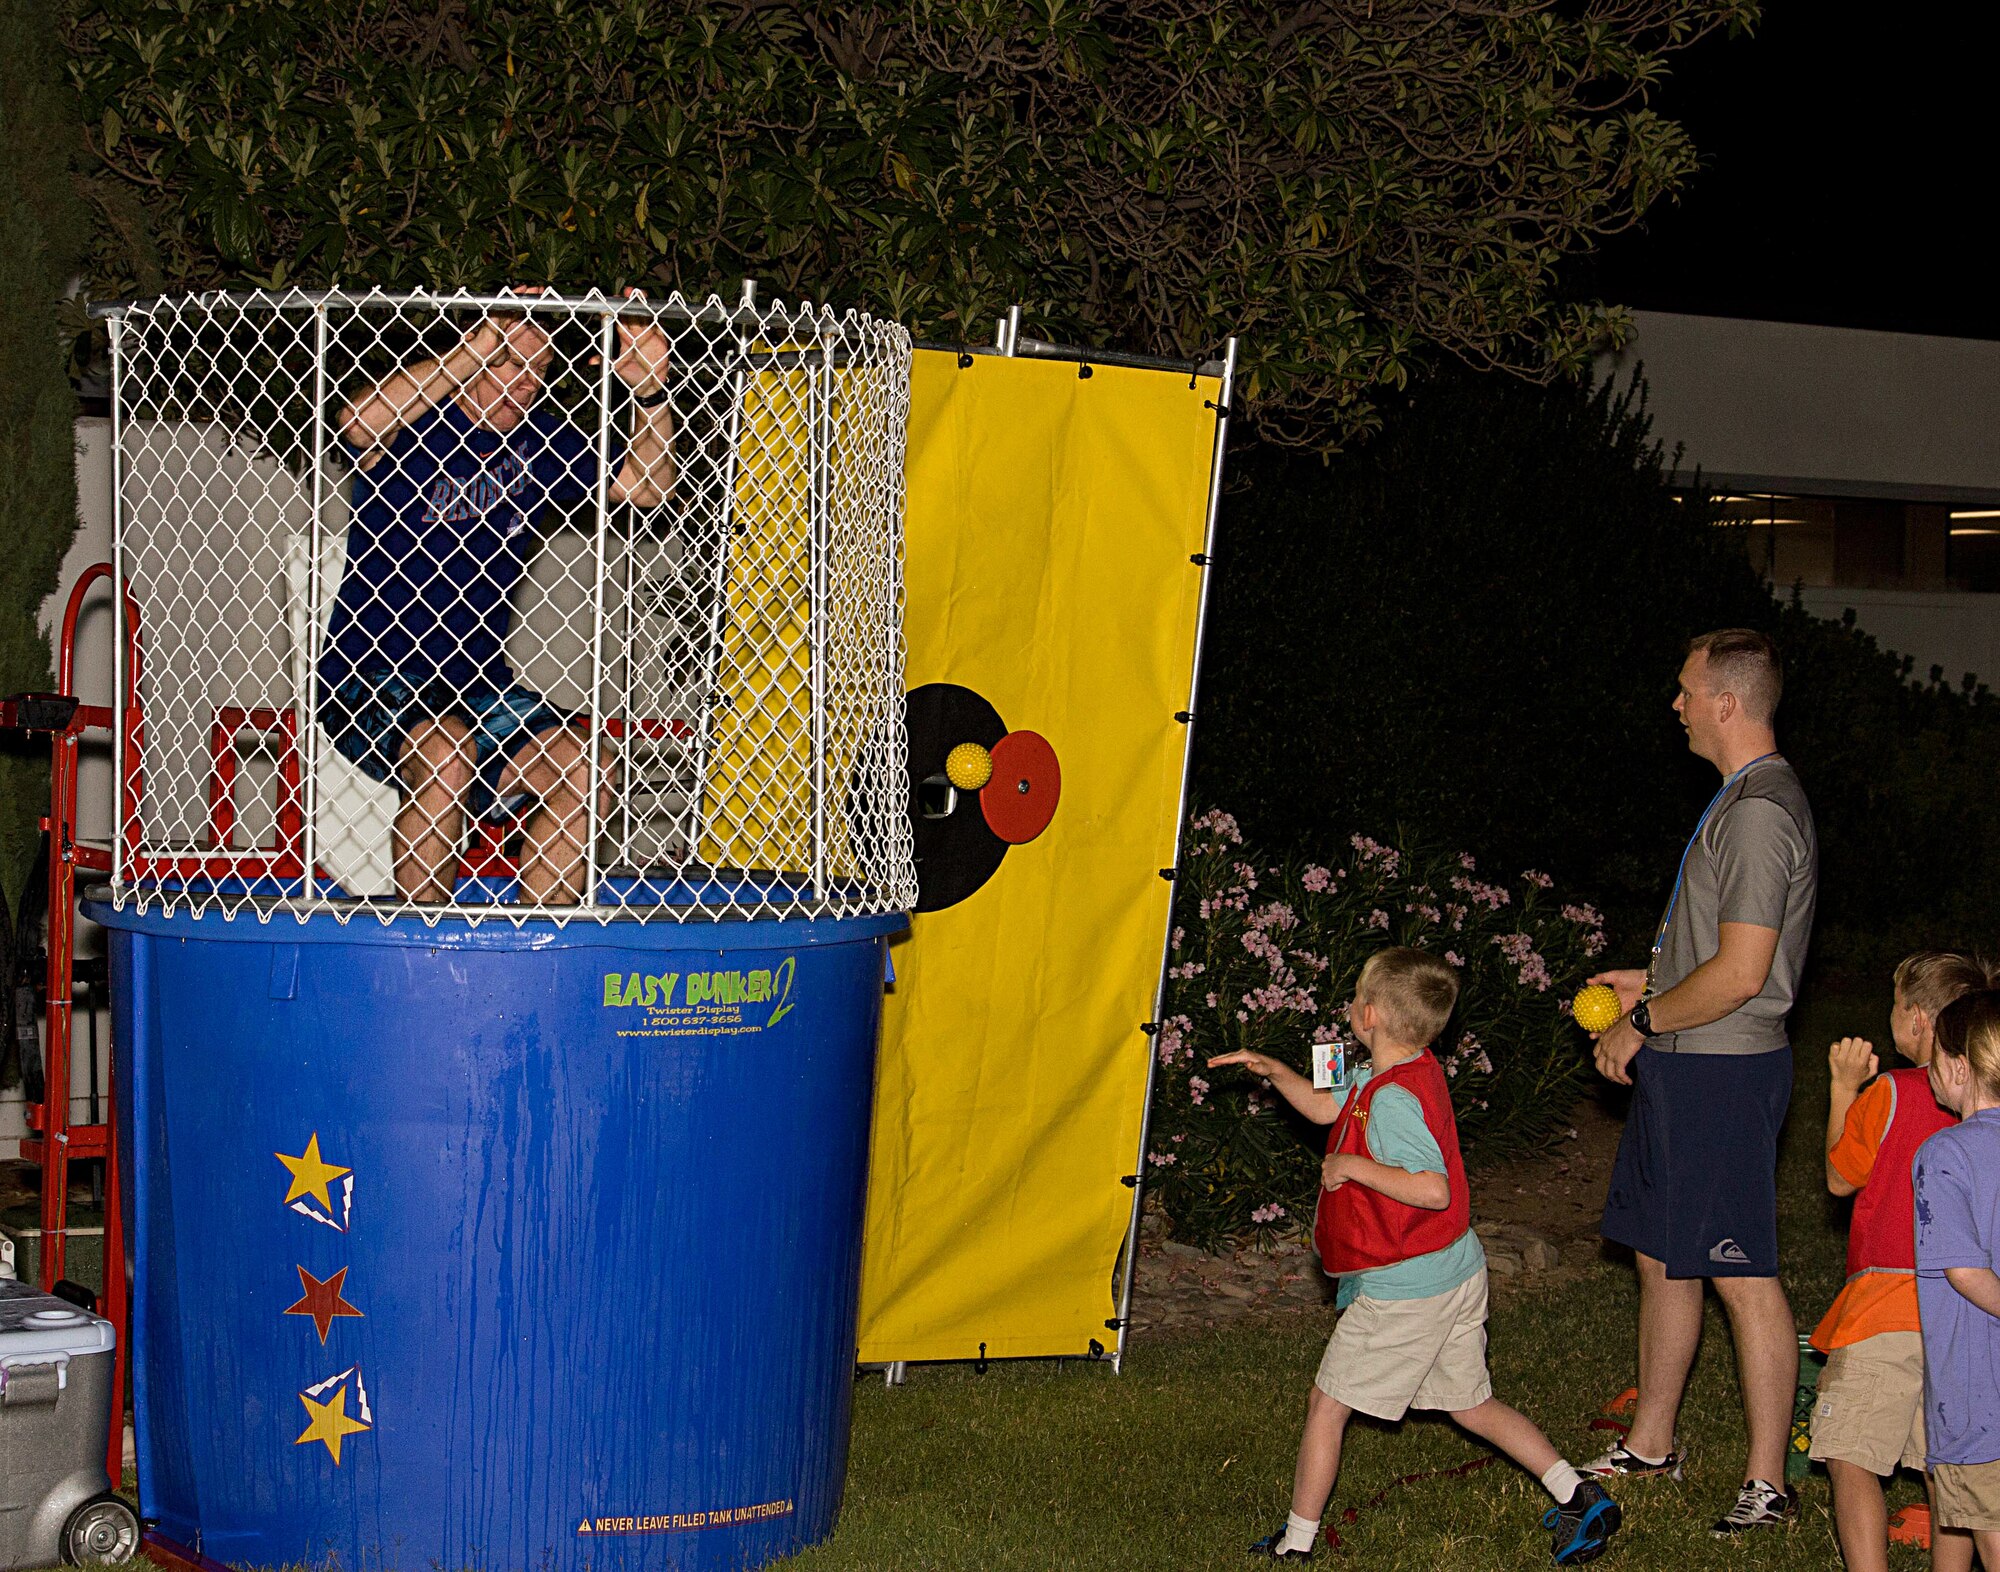 U.S. Air Force Capt. (Chaplain) John Boyer, 355th Fighter Wing, sits in a dunking booth at Davis-Monthan Air Force Base, Ariz., Sept. 26, 2012. The booth was part of an event for the D-M Awana organization, a faith-based initiative to give children and youths a place to have fun while learning about the Bible. (Courtesy photo/Released)